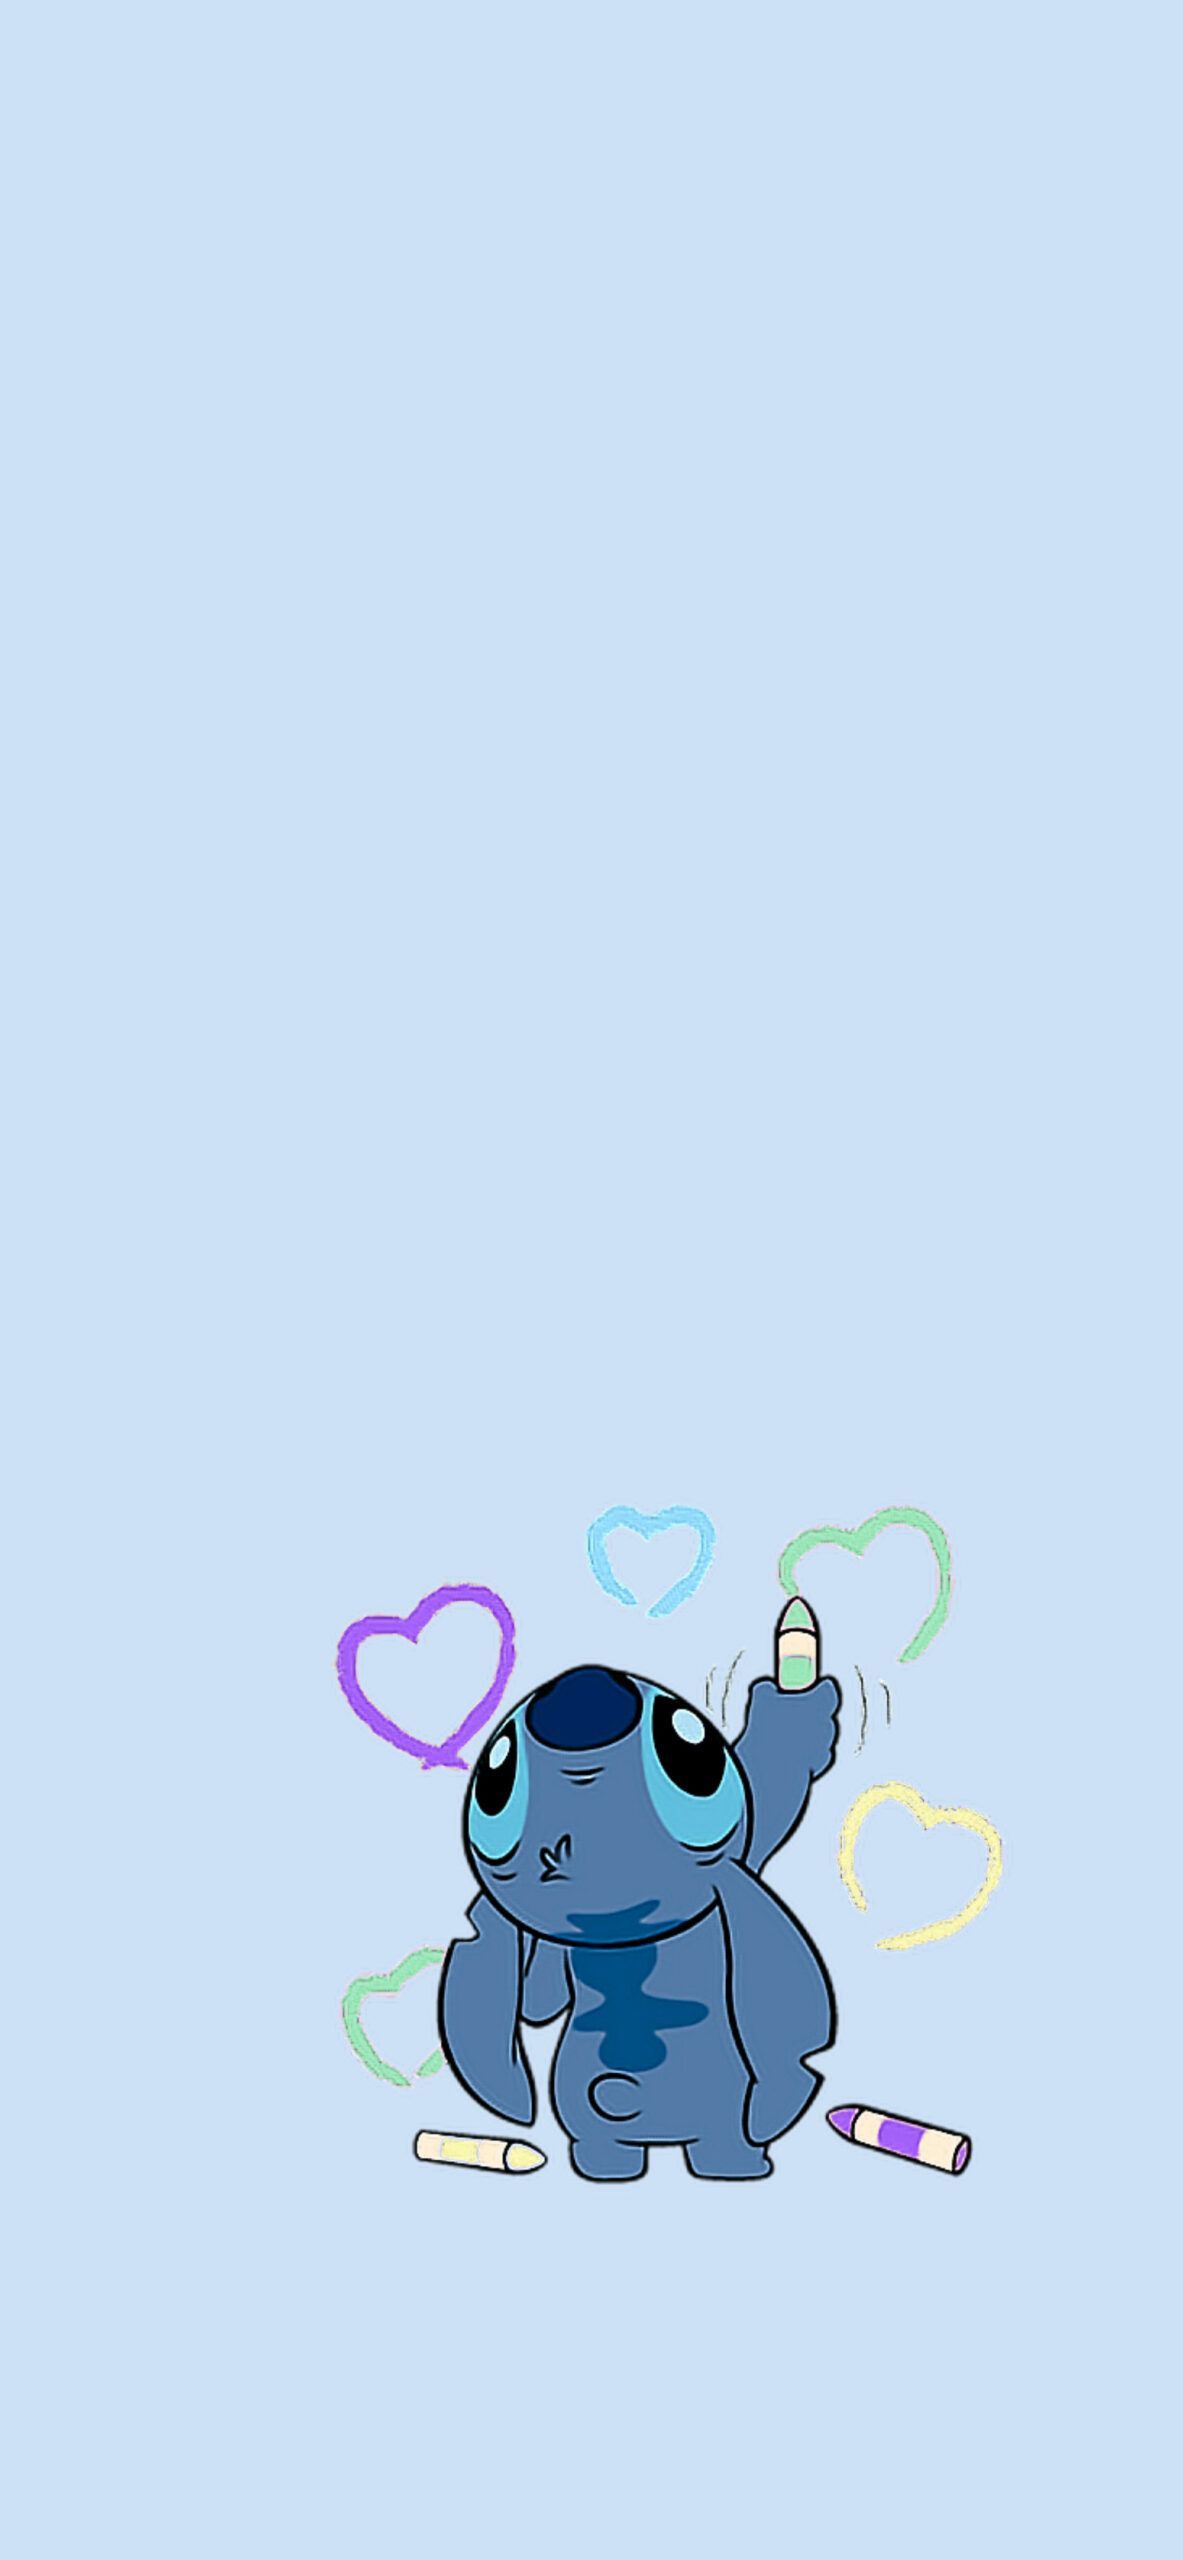 IPhone wallpaper of stitch drawing hearts on a blue background - Illustration, Stitch